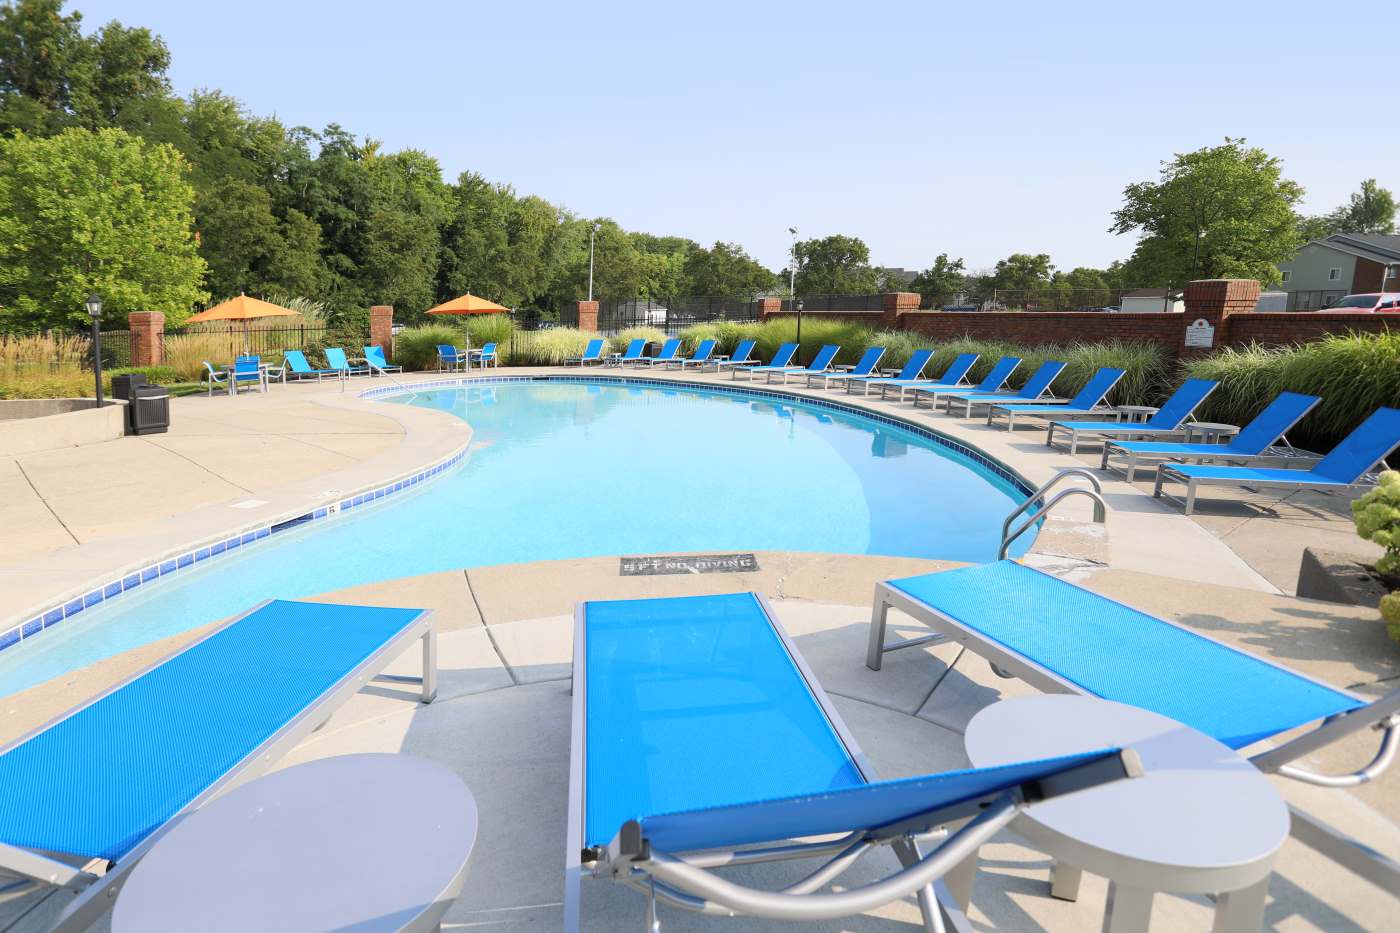 Fox Chase North's swimming pool and lounge seating options.